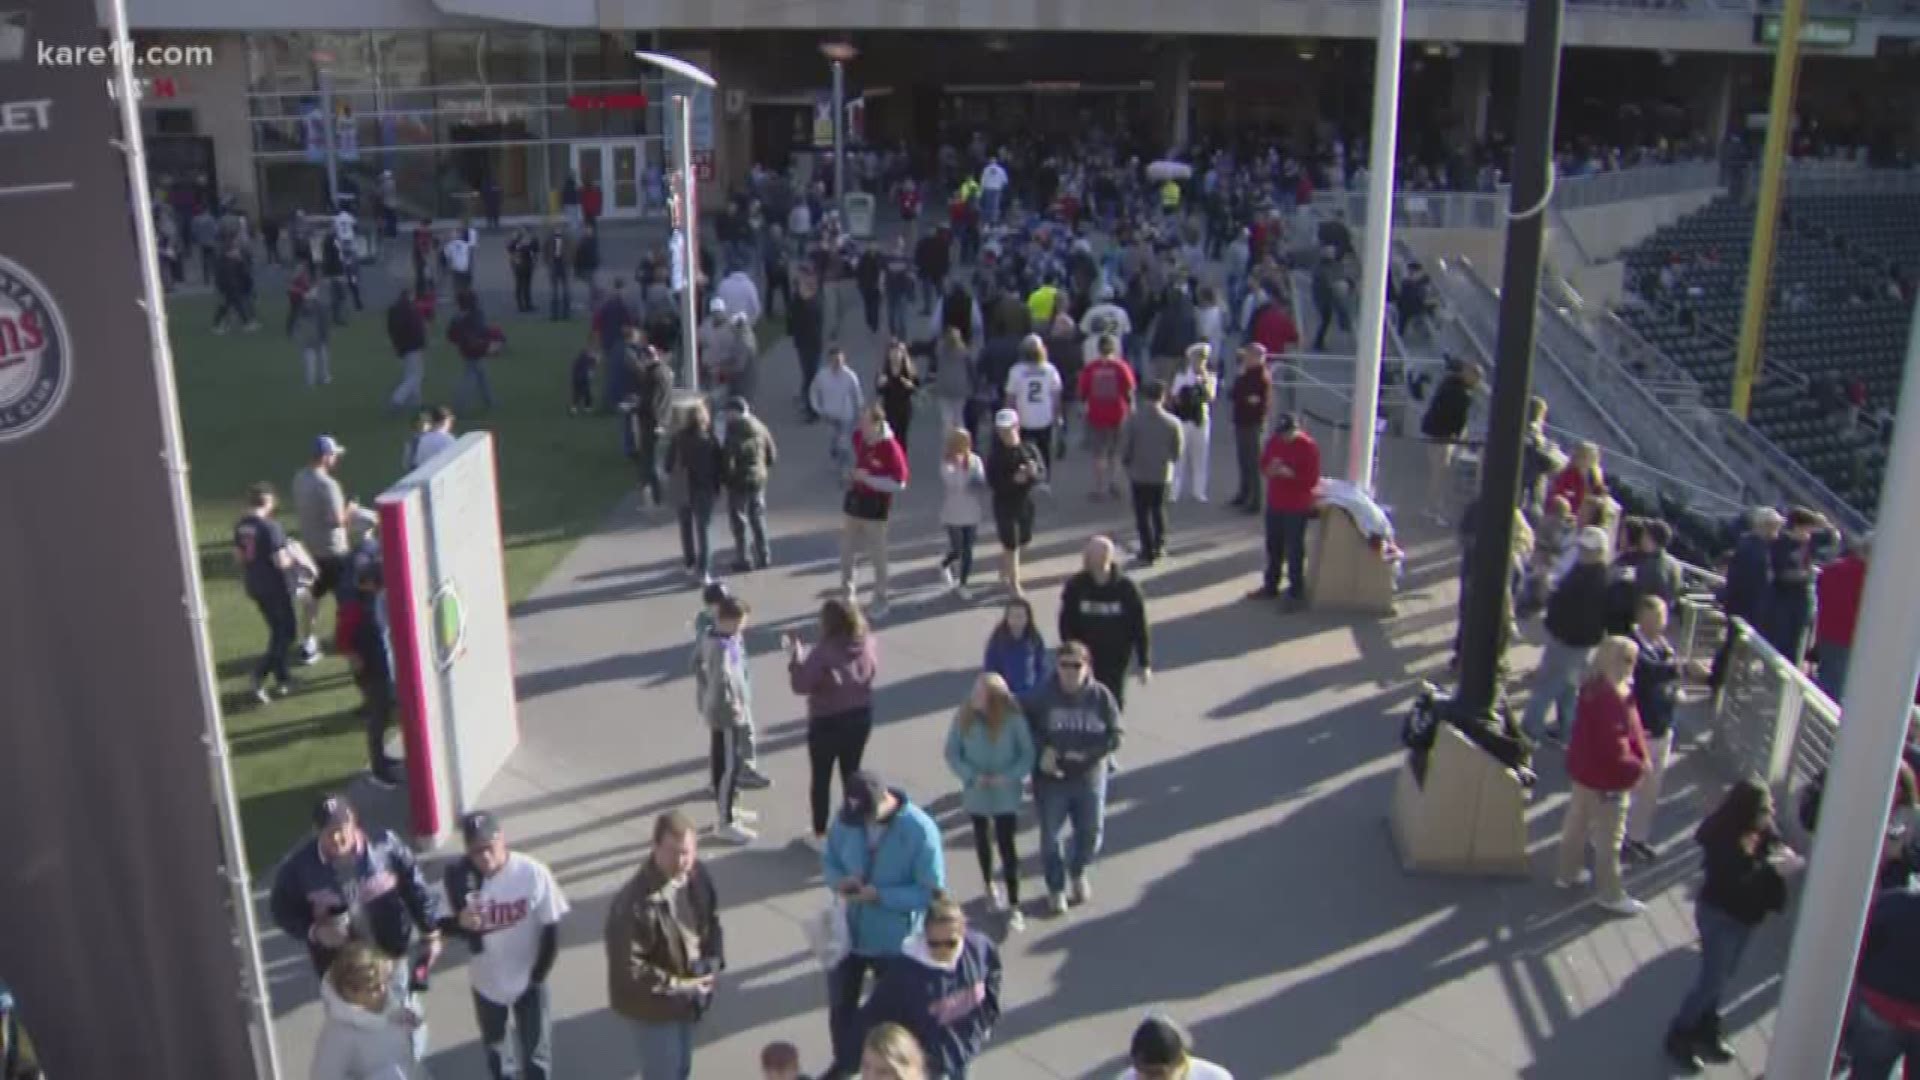 New rules at Target Field to help speed things up for fans standing in line.